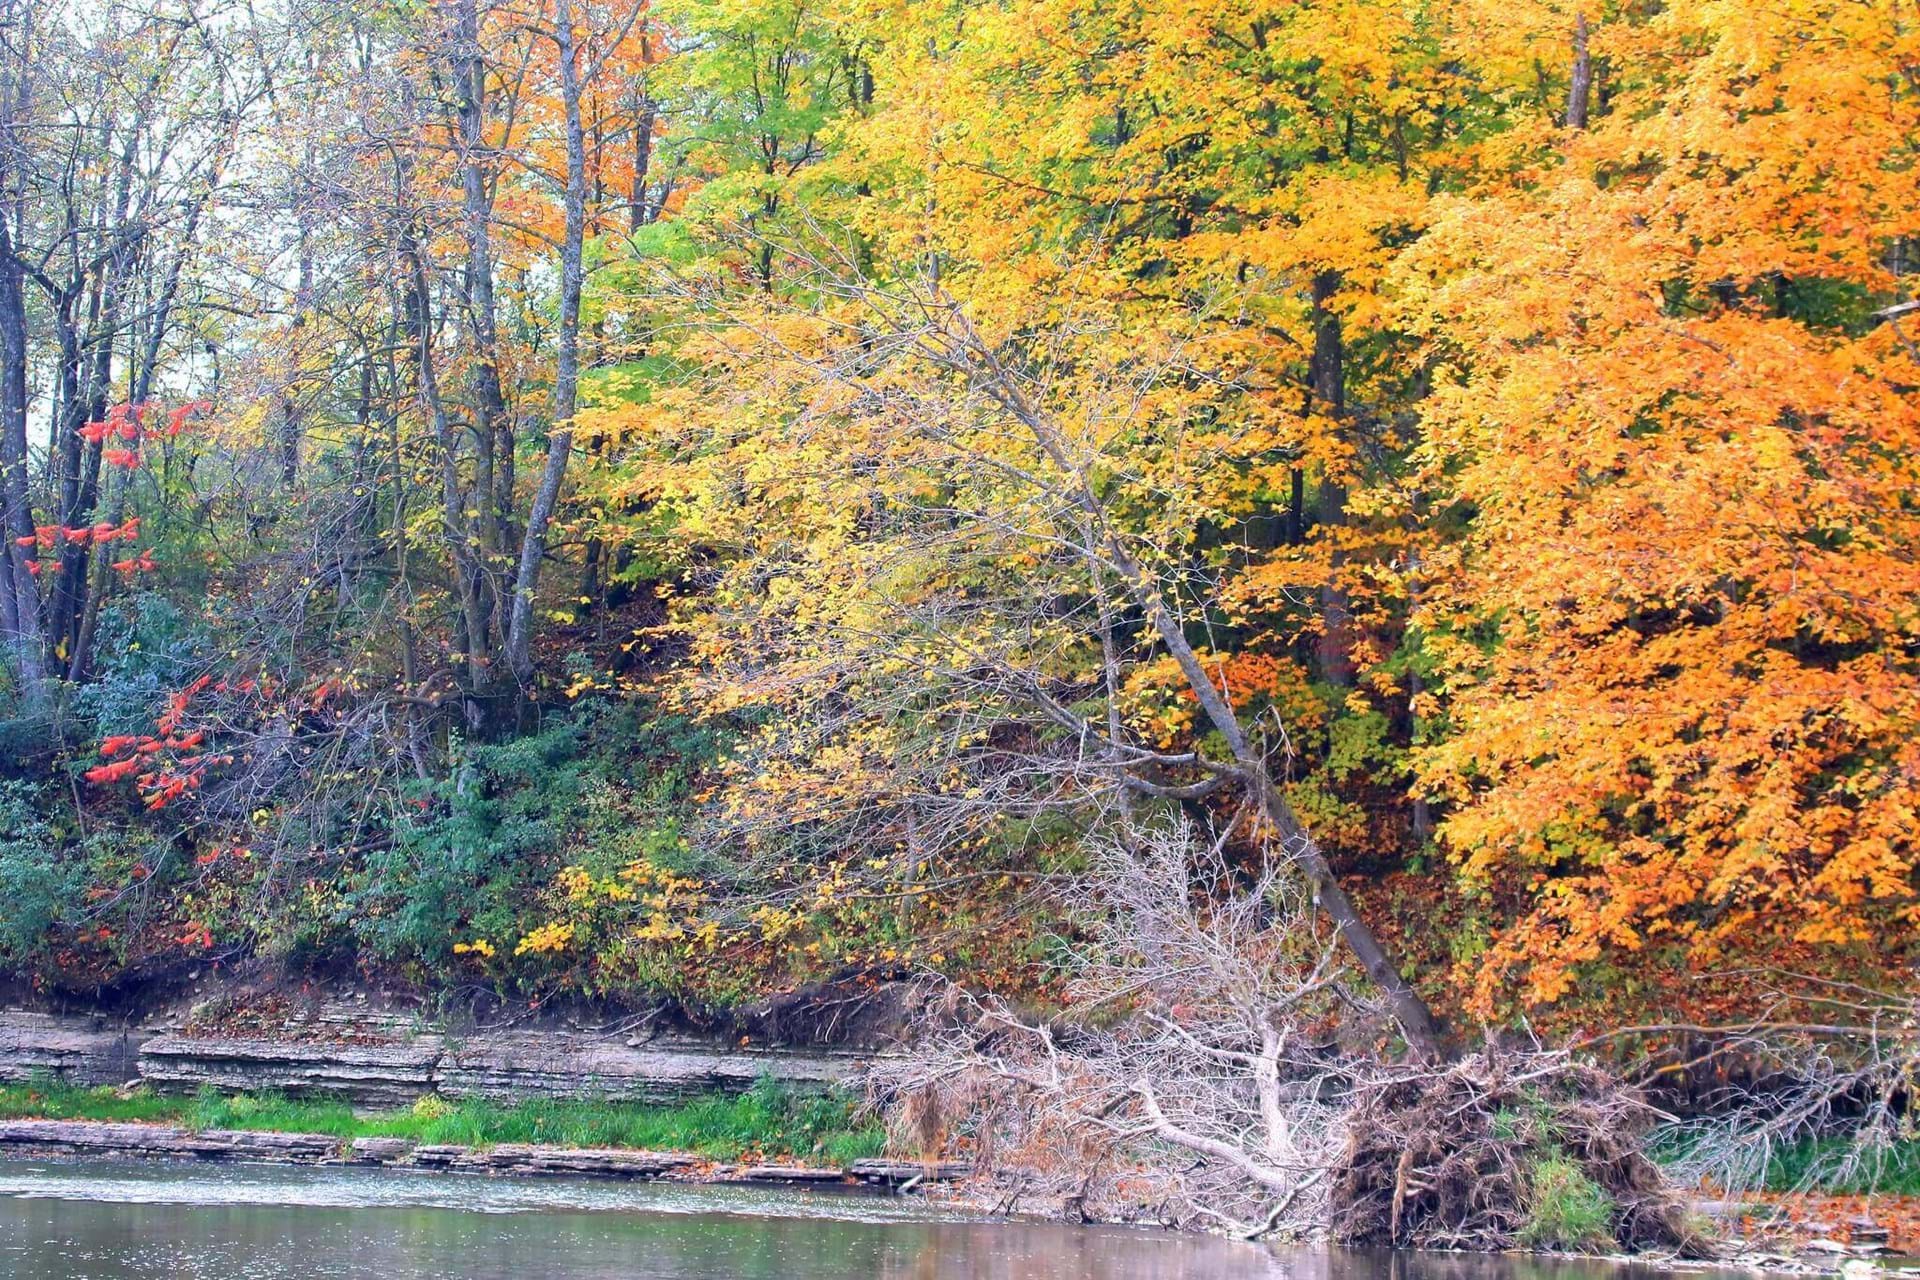 Some trees overlooking a river in prime fall coloring